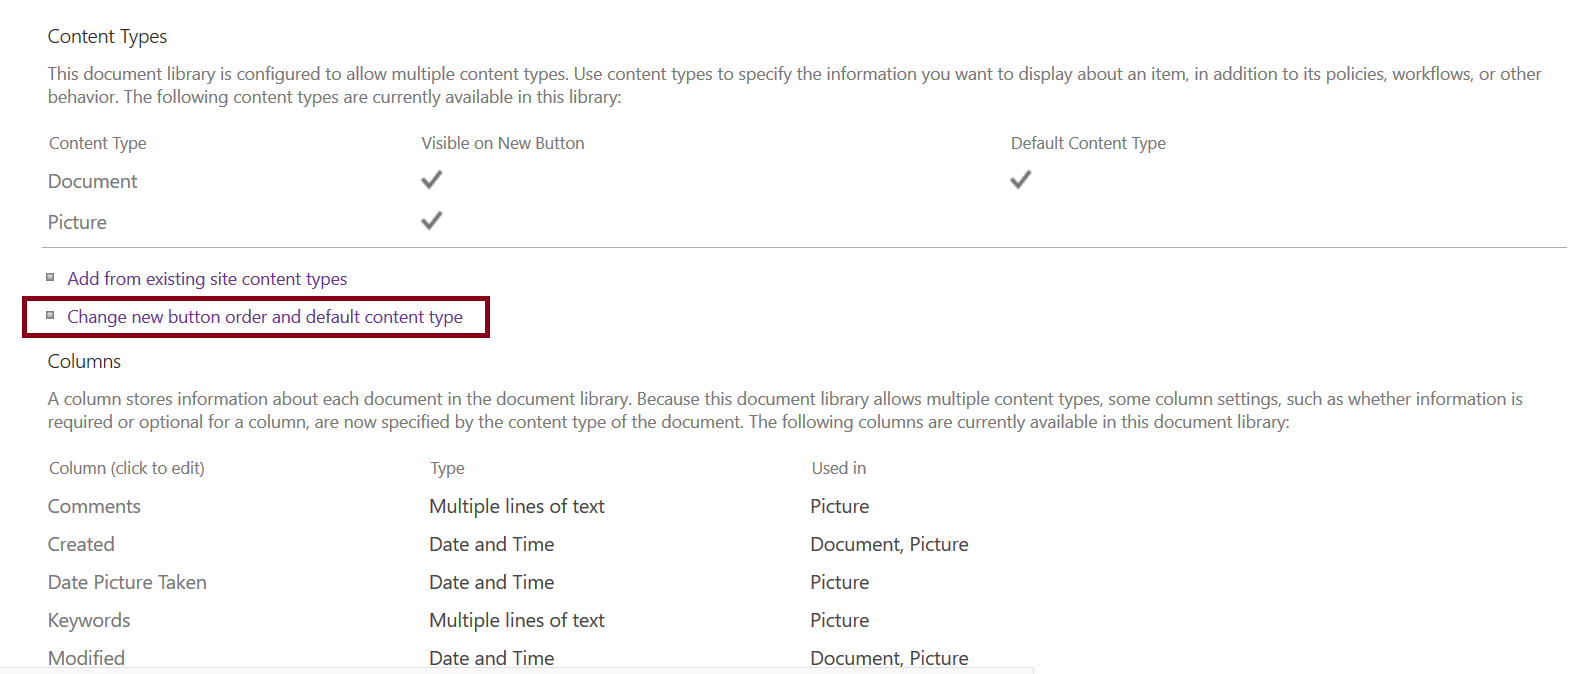 Change new button order and default content type - document library settings